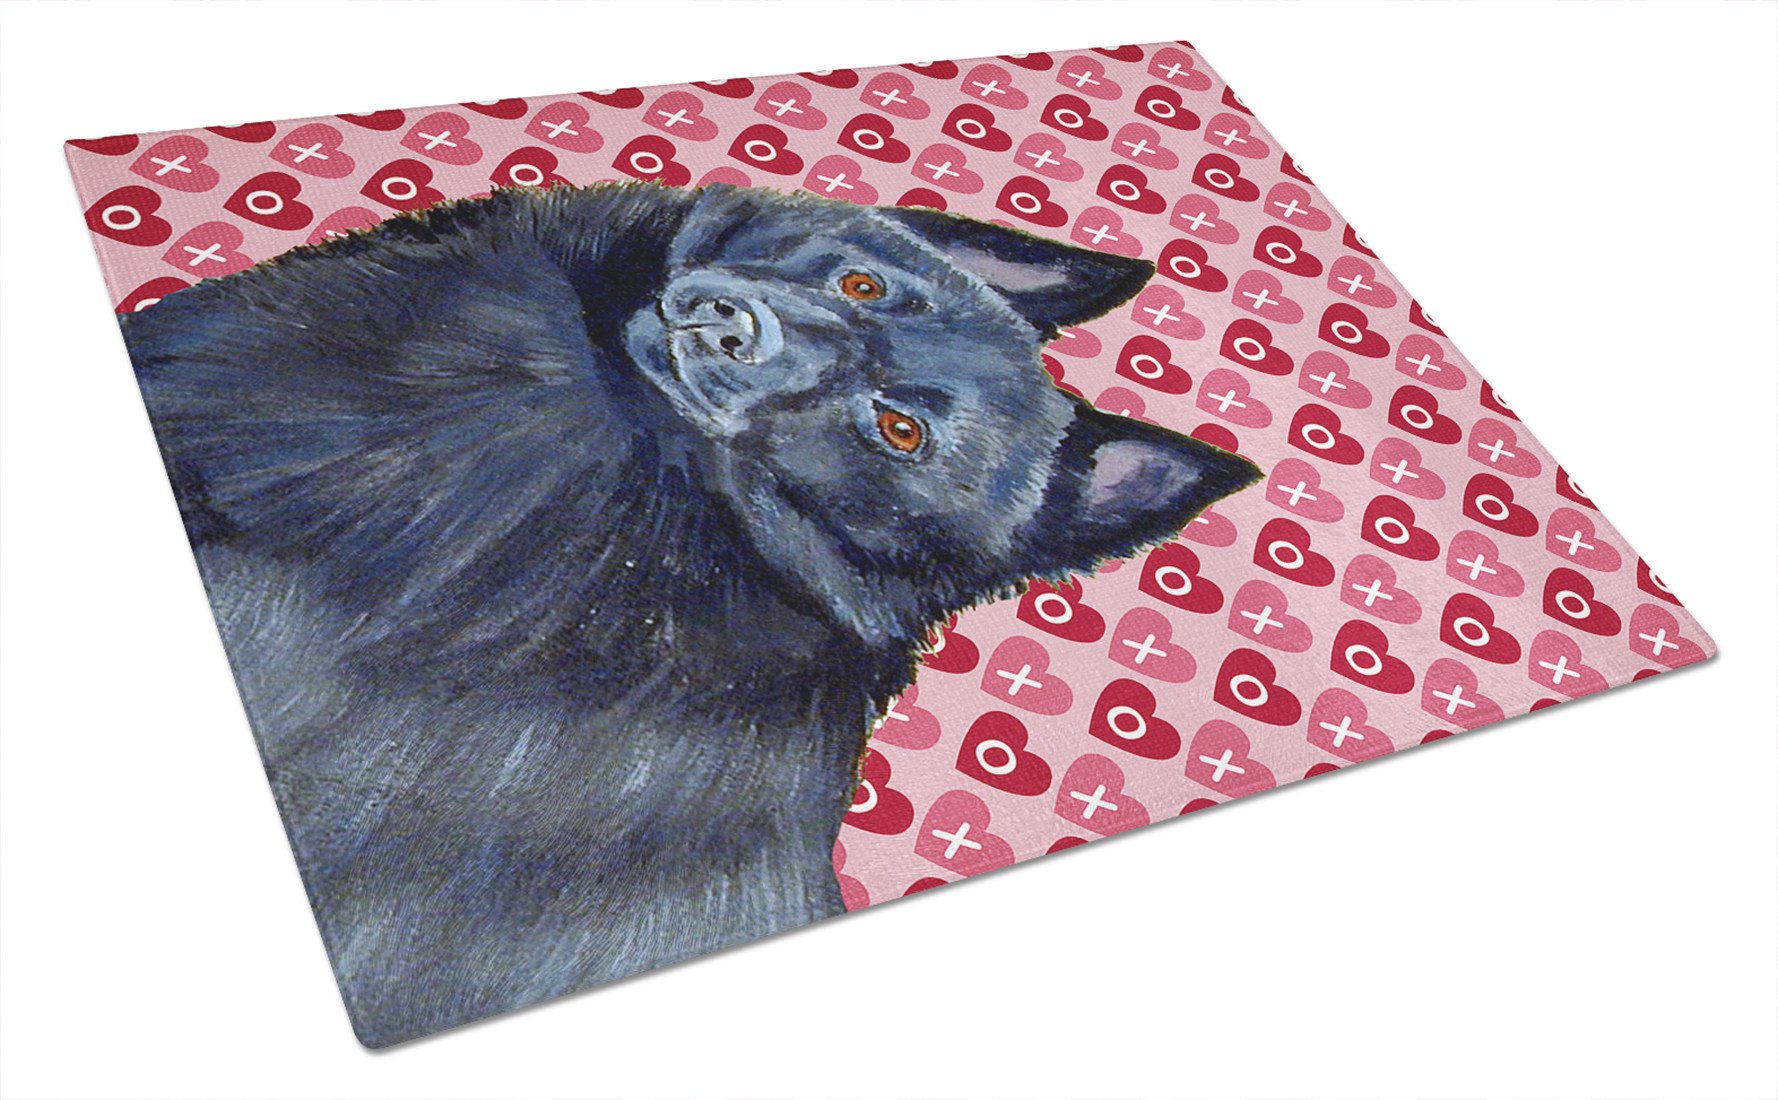 Schipperke Hearts Love and Valentine's Day Portrait Glass Cutting Board Large by Caroline's Treasures